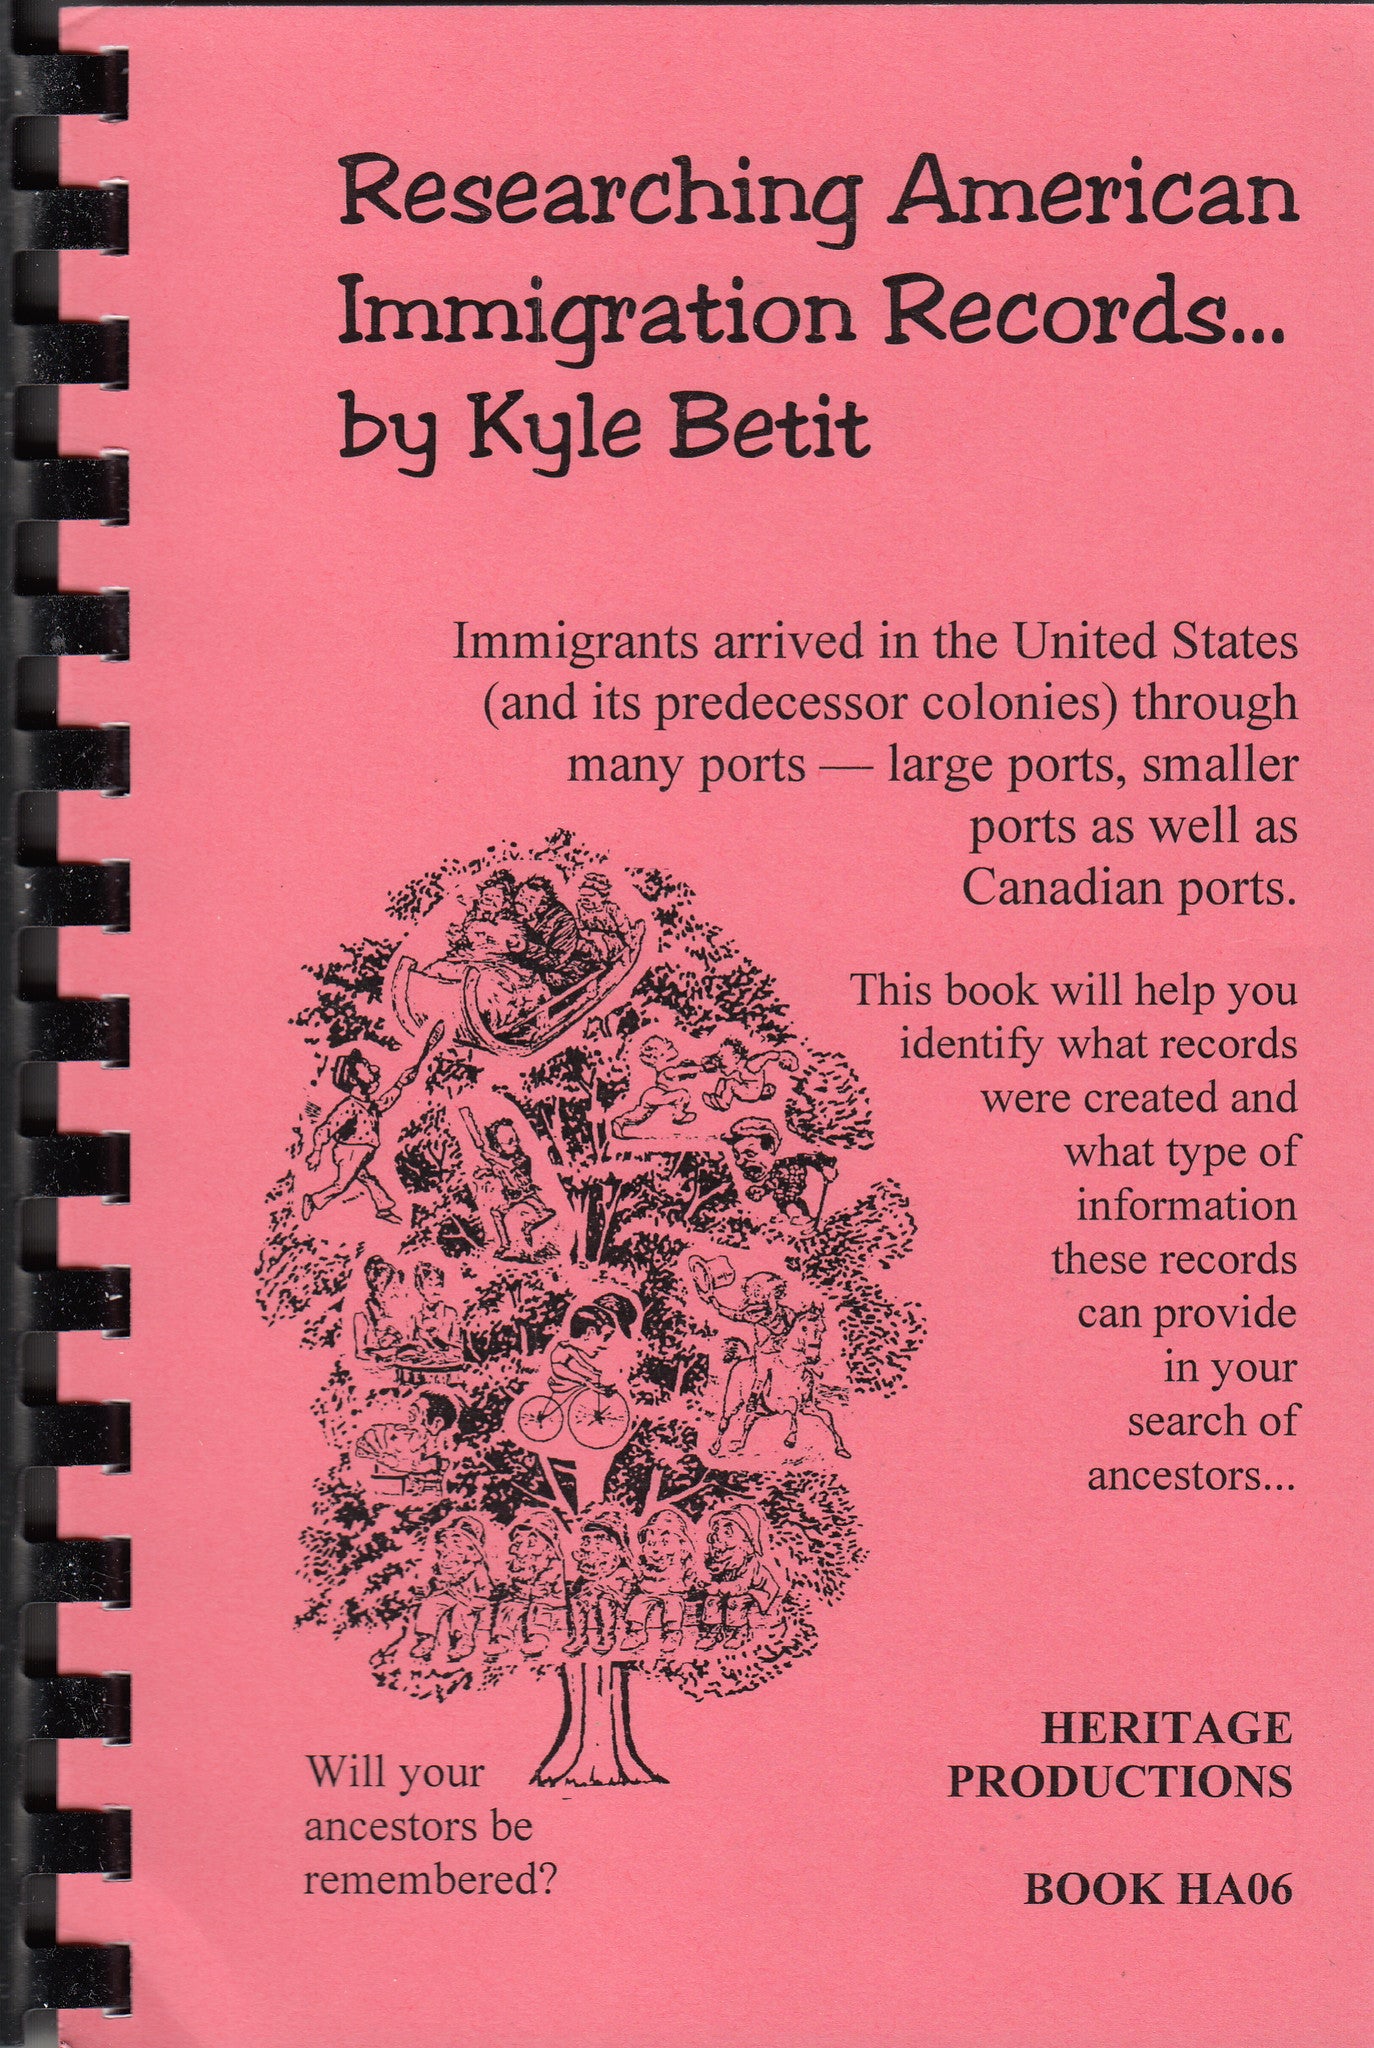 Researching American Immigration Records